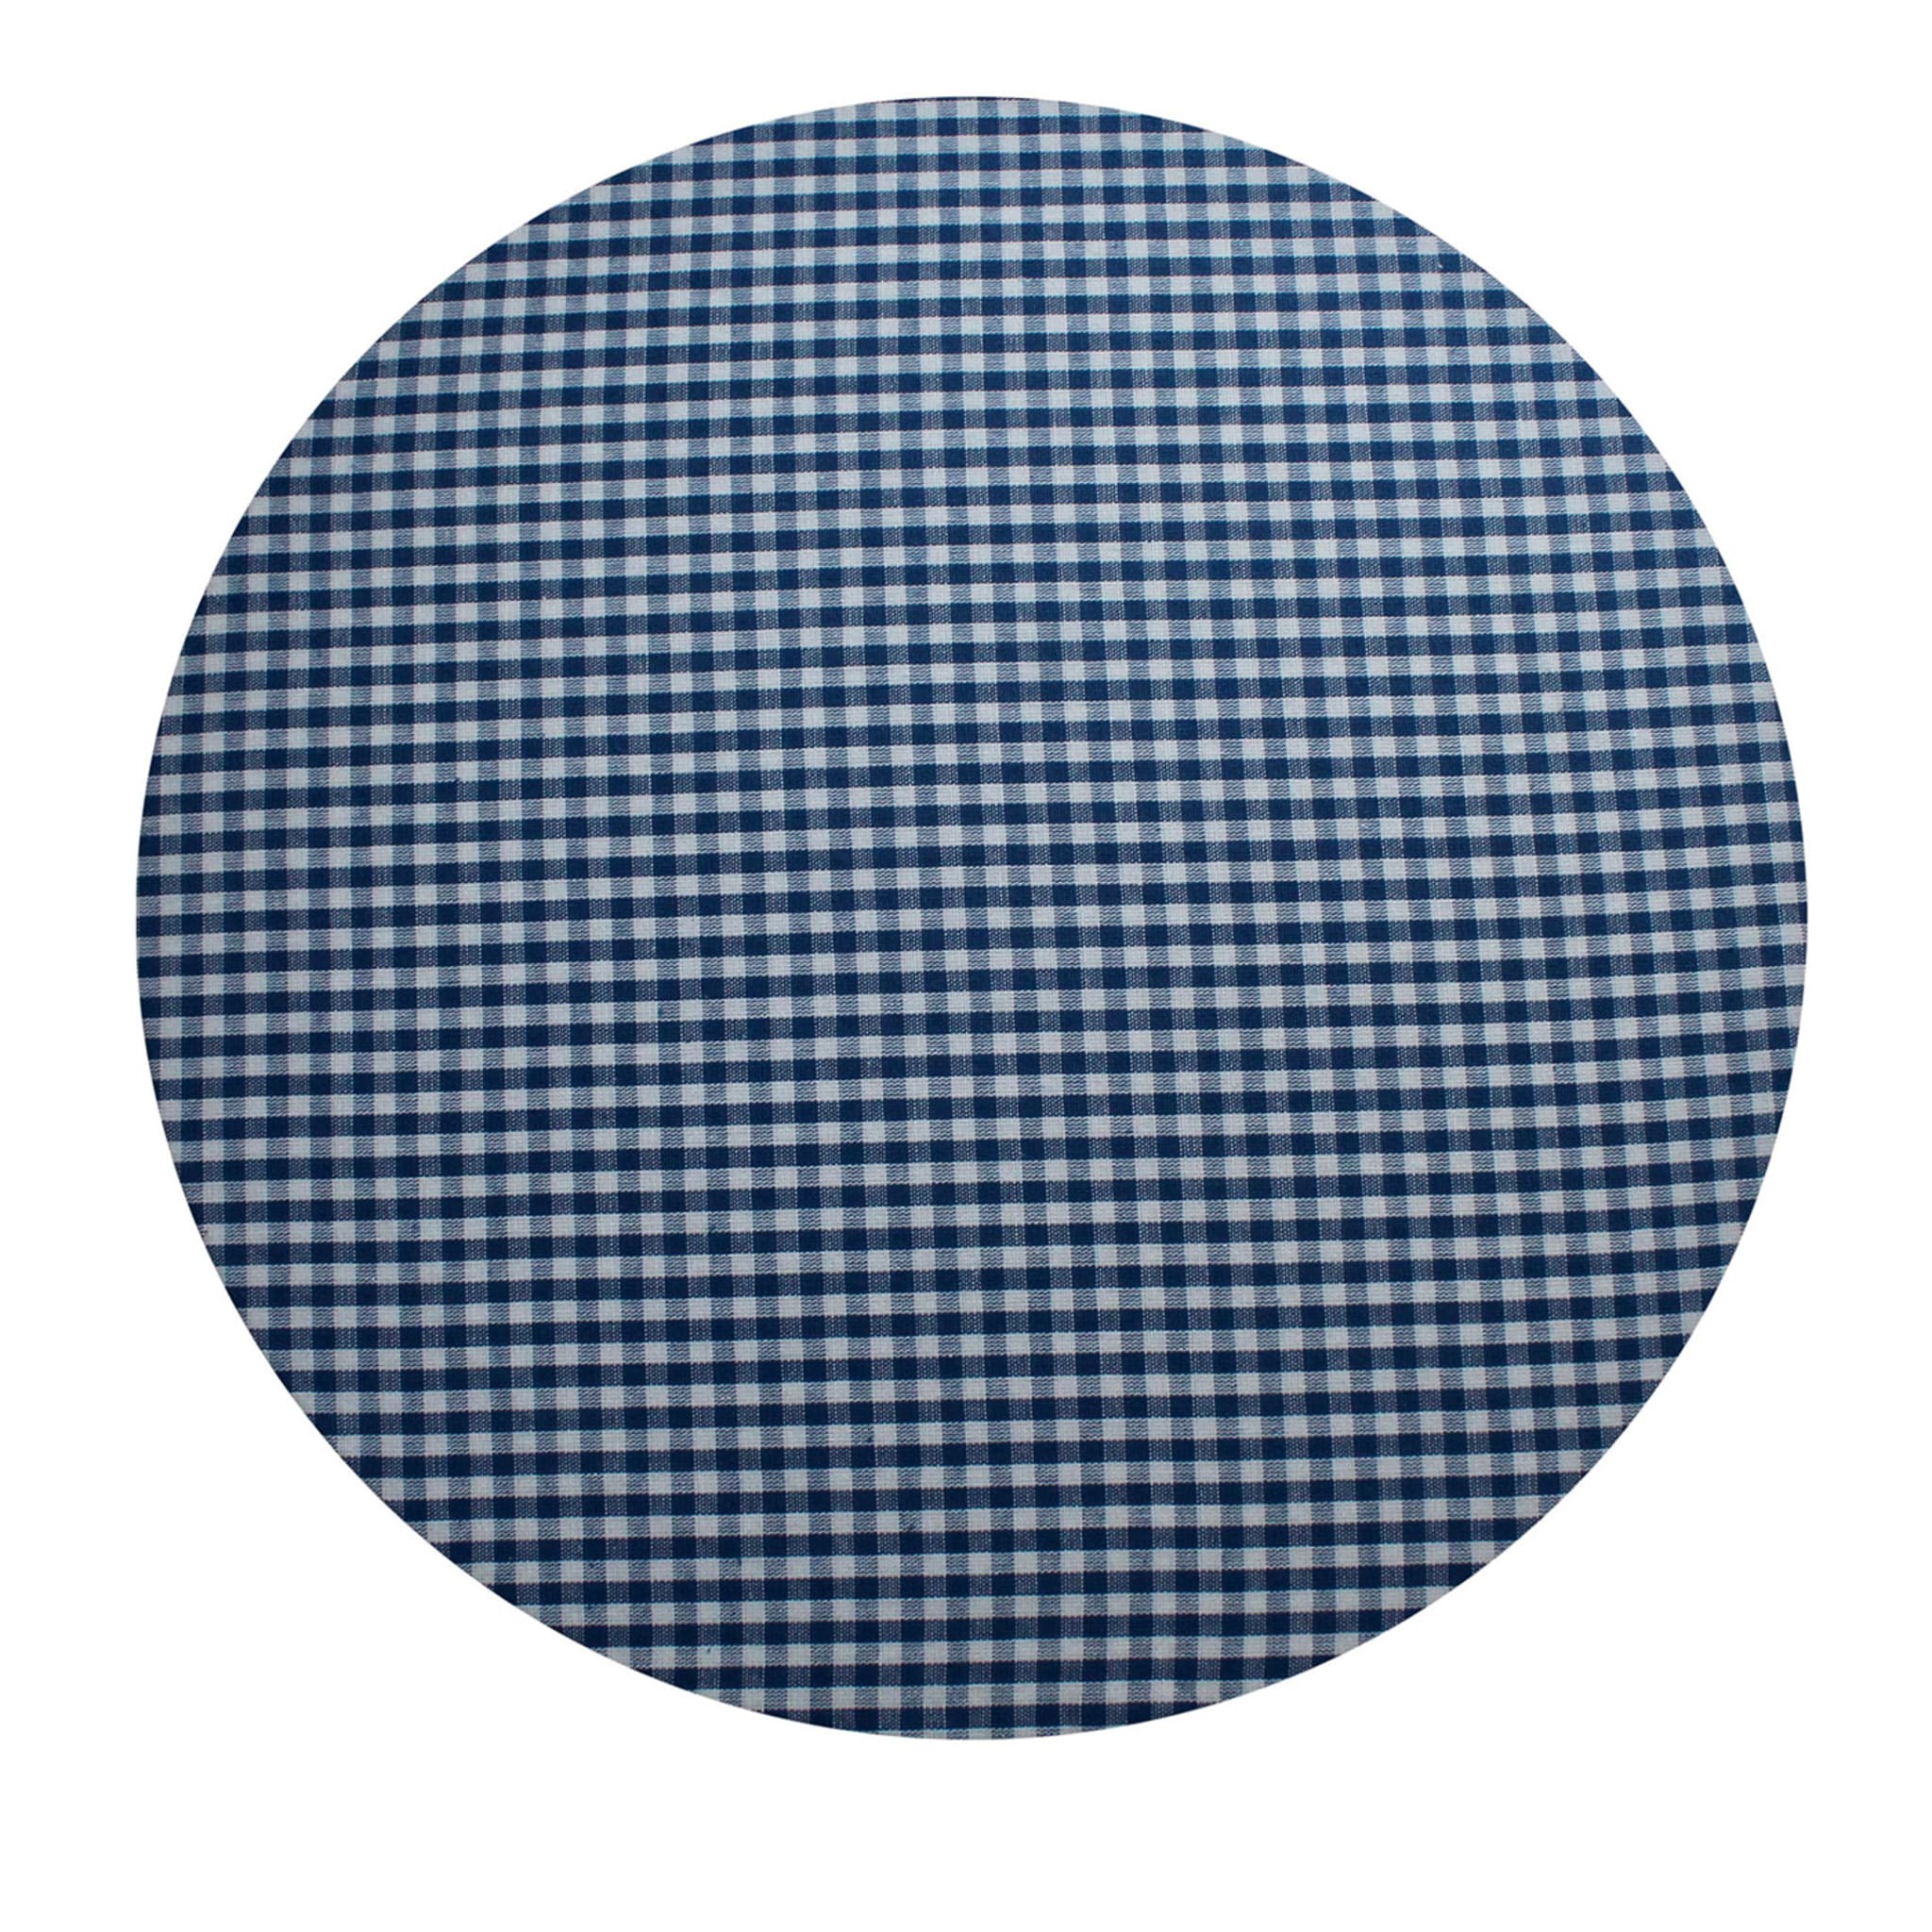 Cuffiette Check Round Blue & White Placemat #1 - Main view